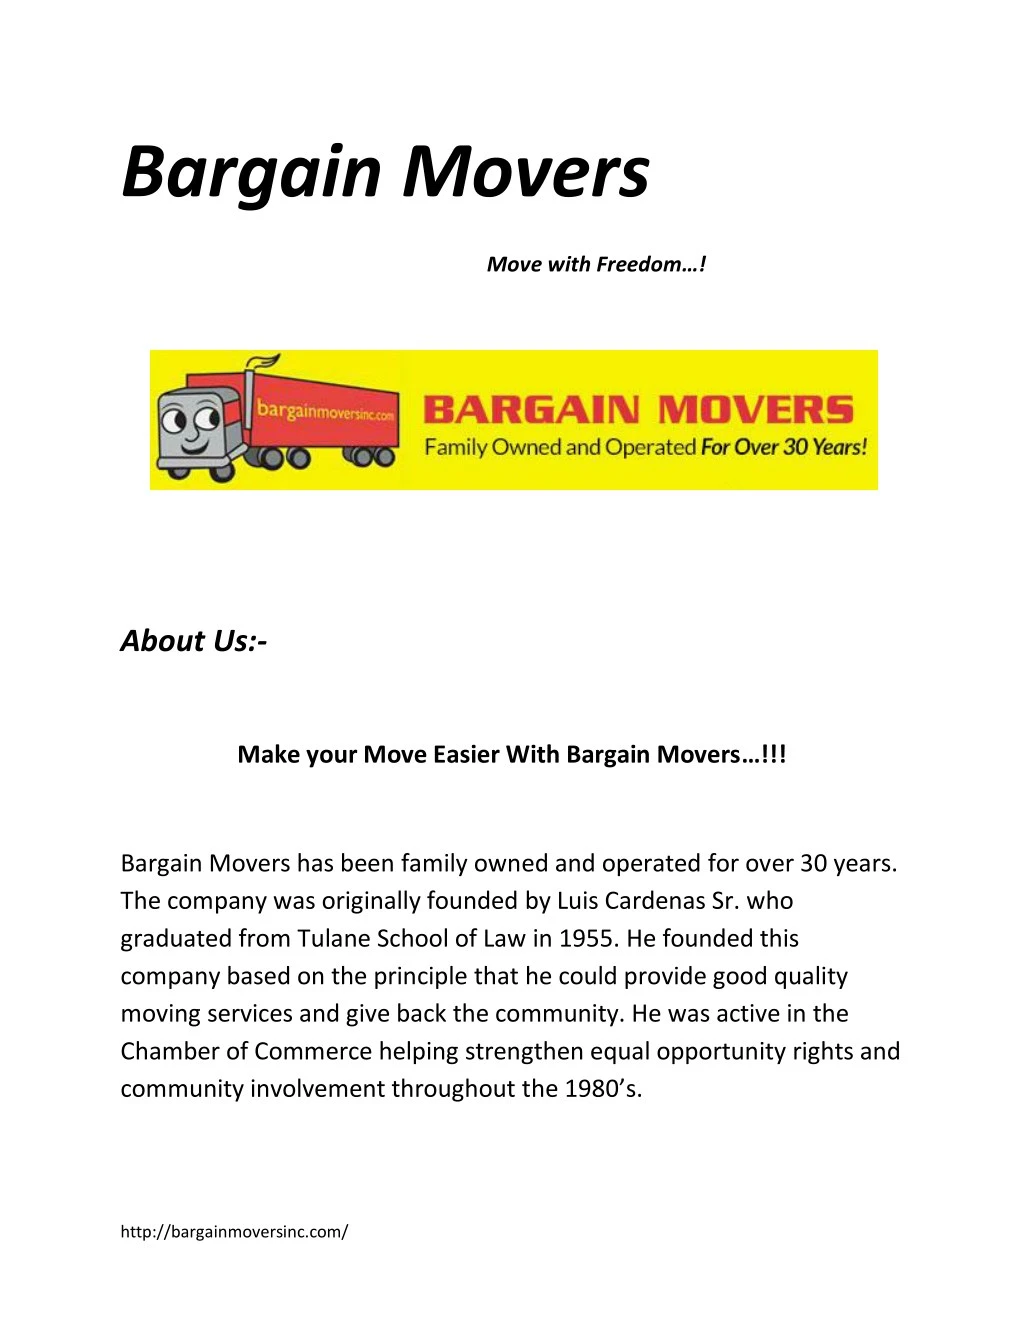 bargain movers